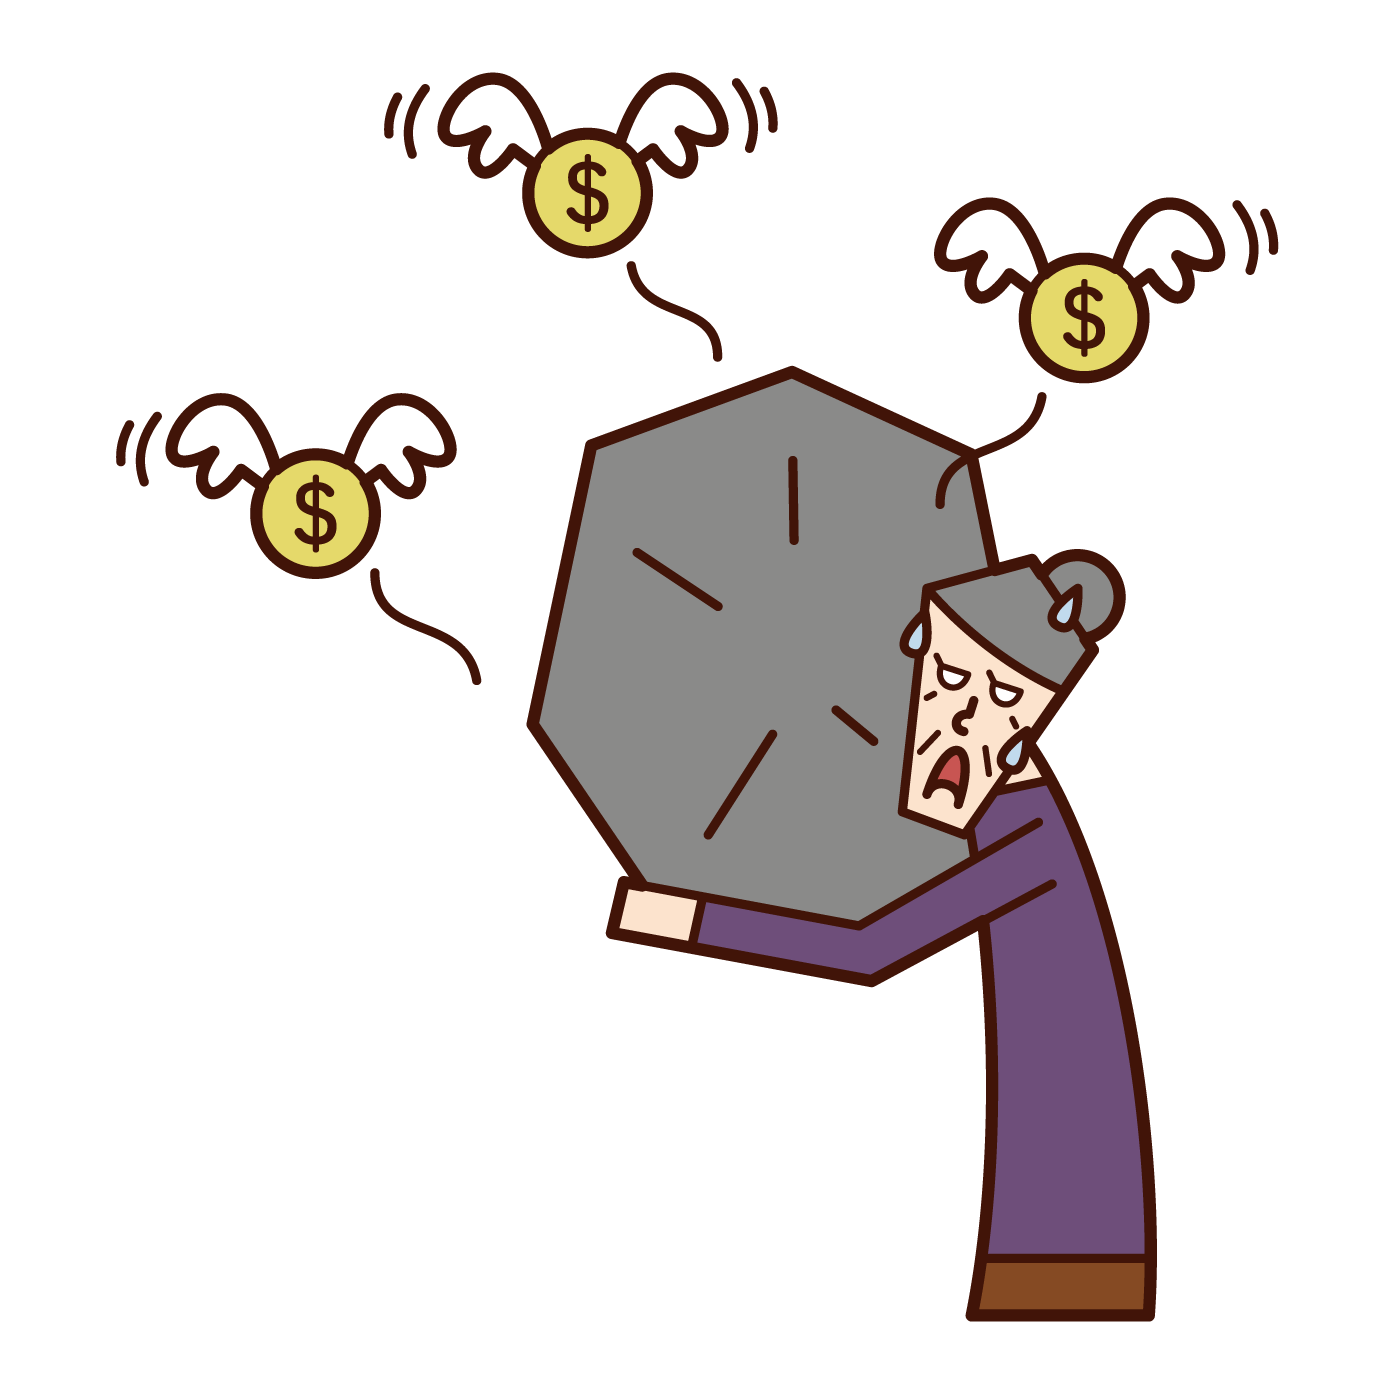 Illustration of a person (grandmother) who is in debt